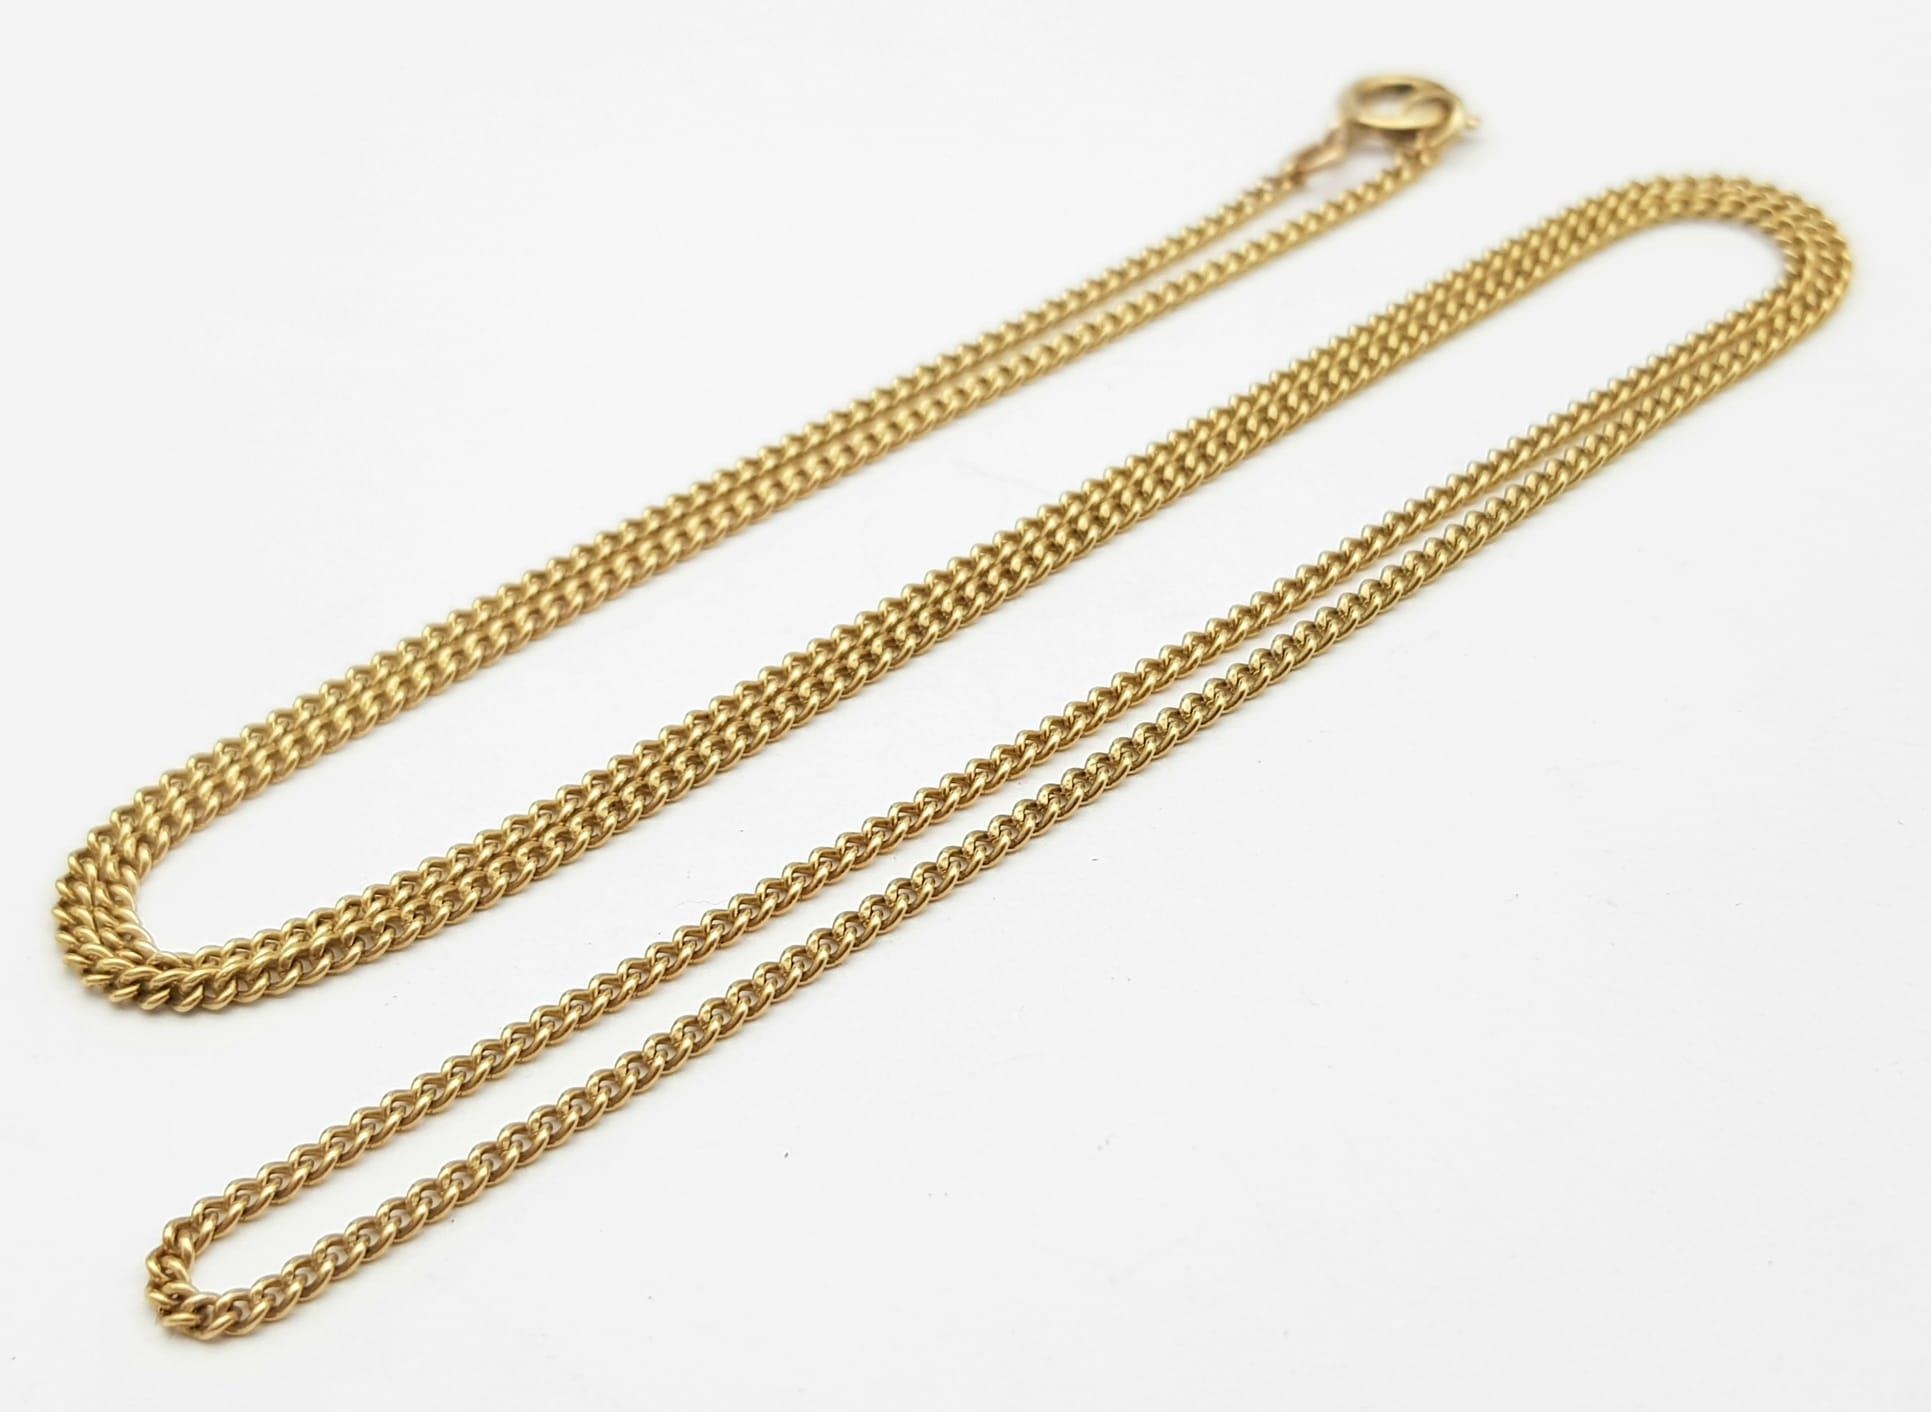 A 9K Yellow Gold Small Curb Link Necklace. 50cm length. 3.66g weight.